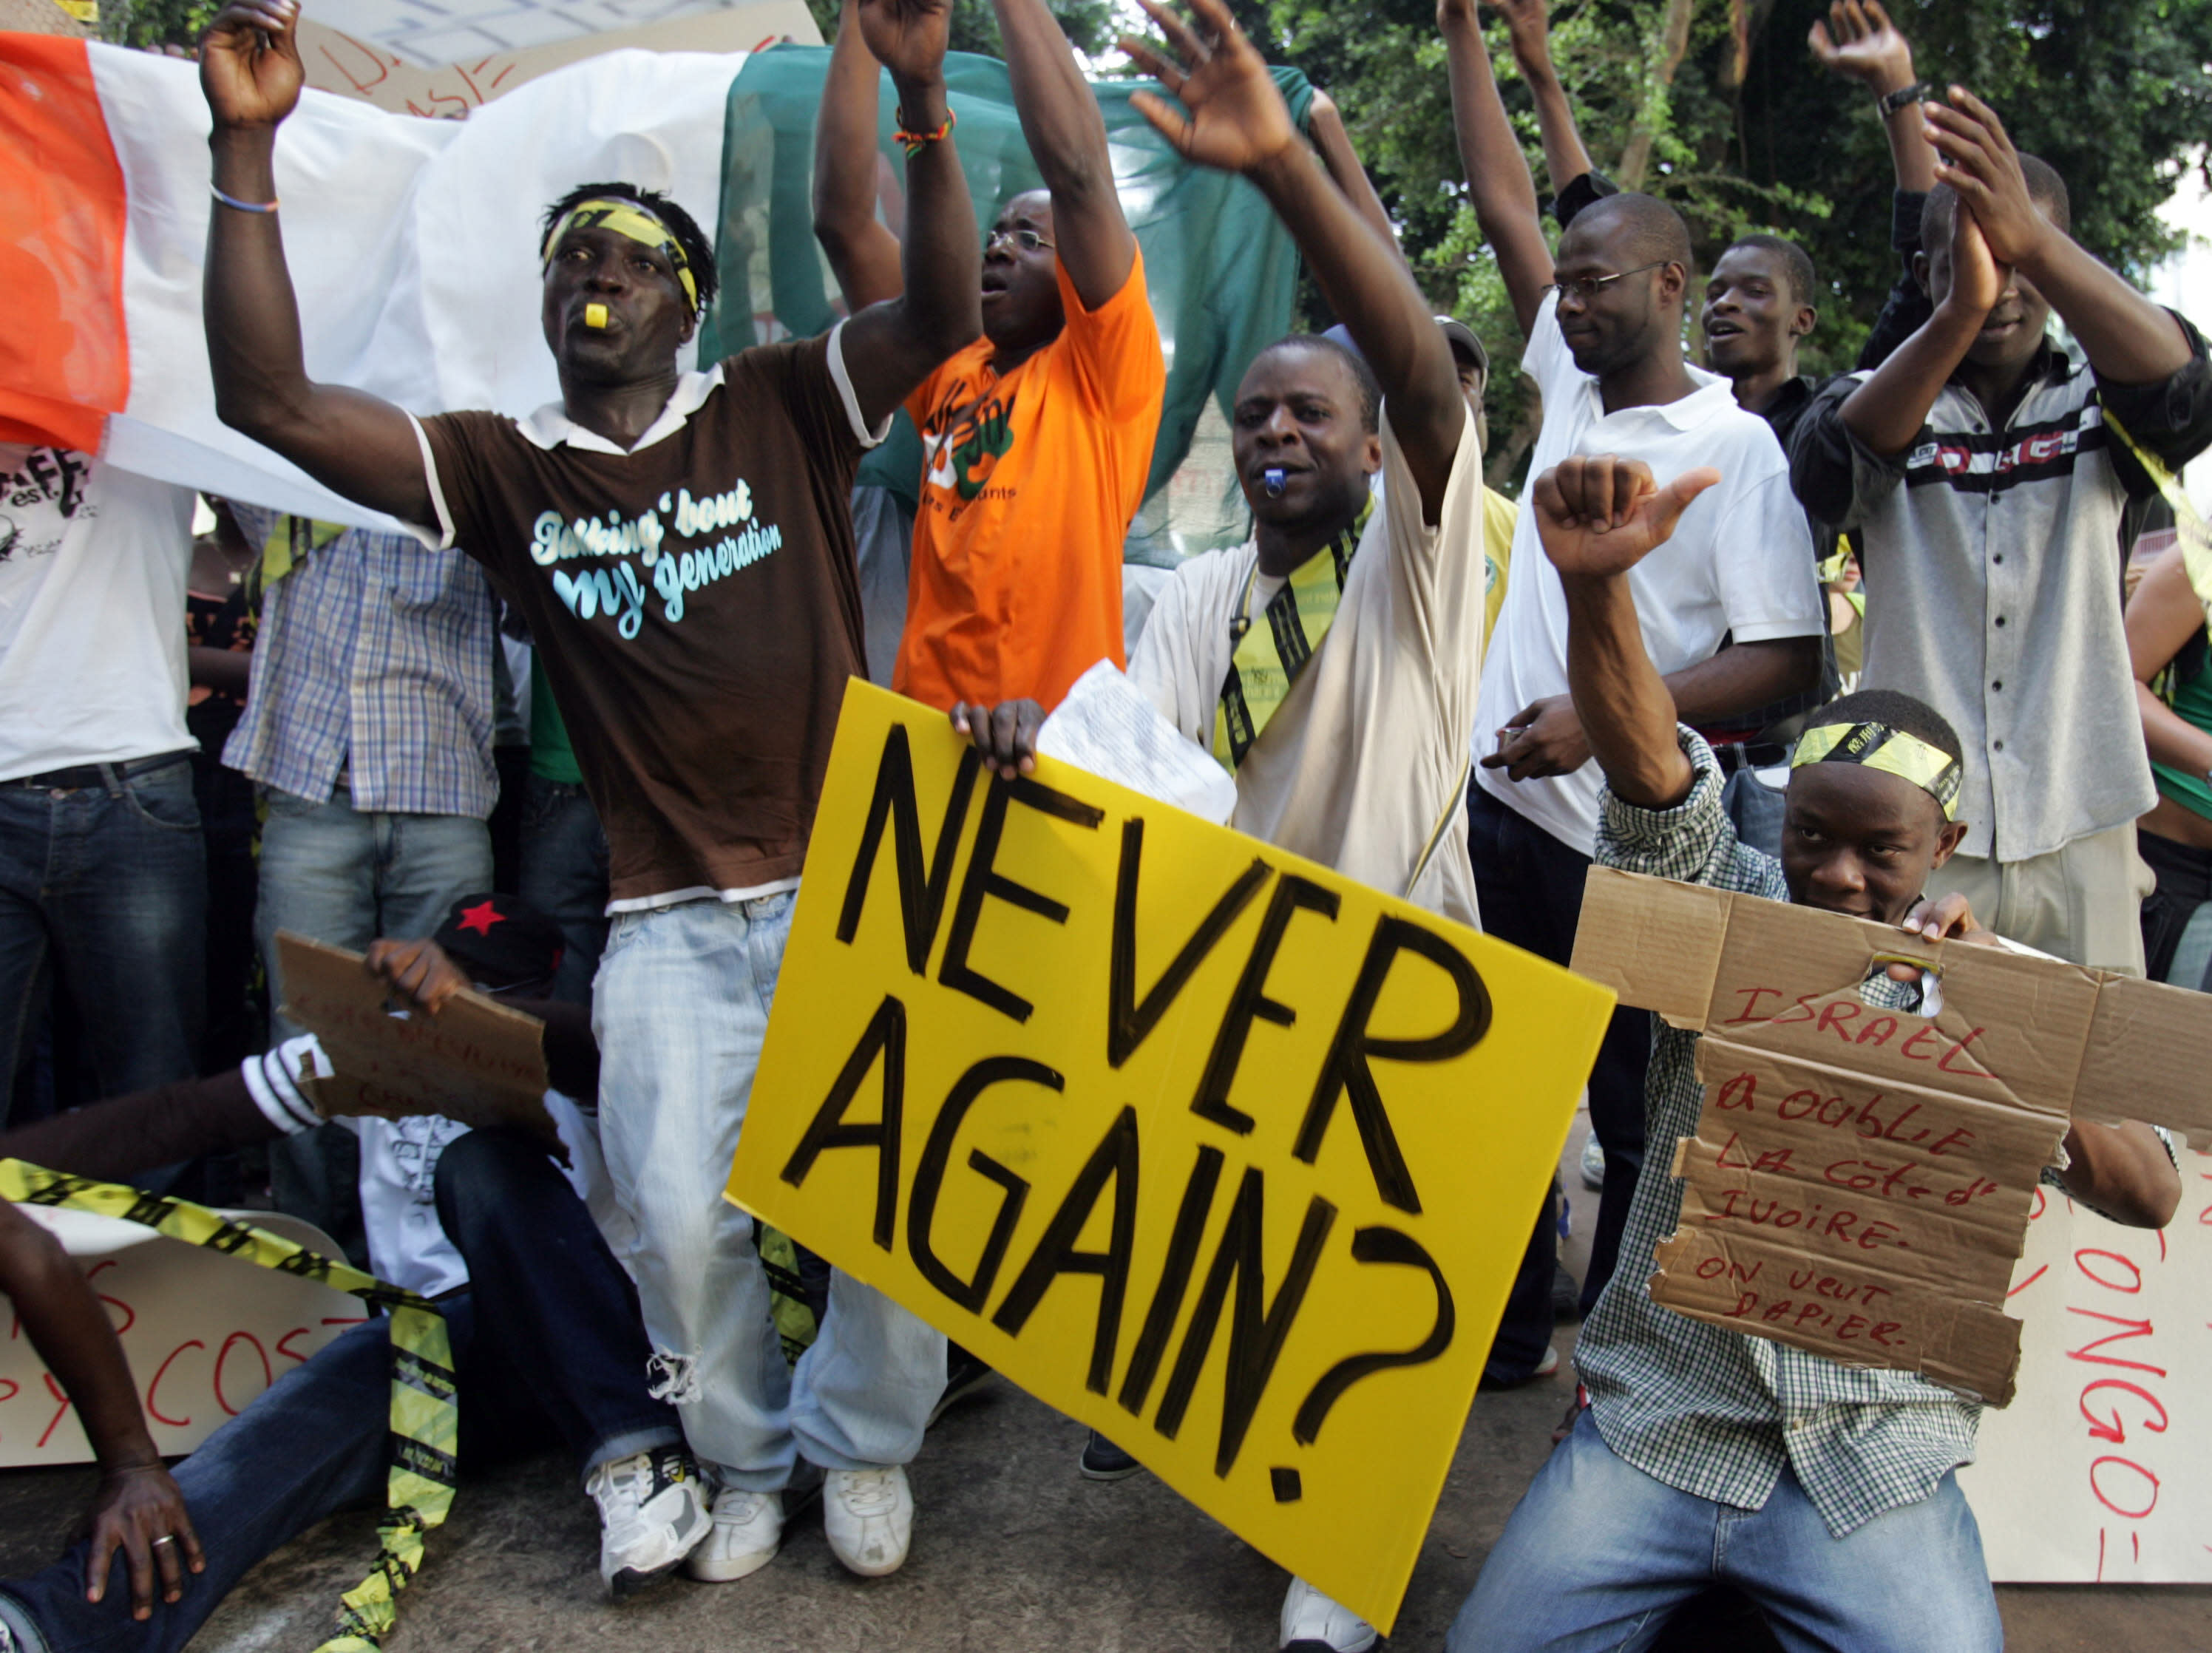 African refugees hold up placades during a demonstatration on the streets of Tel Aviv, Israel (JACK GUEZ / AFP)